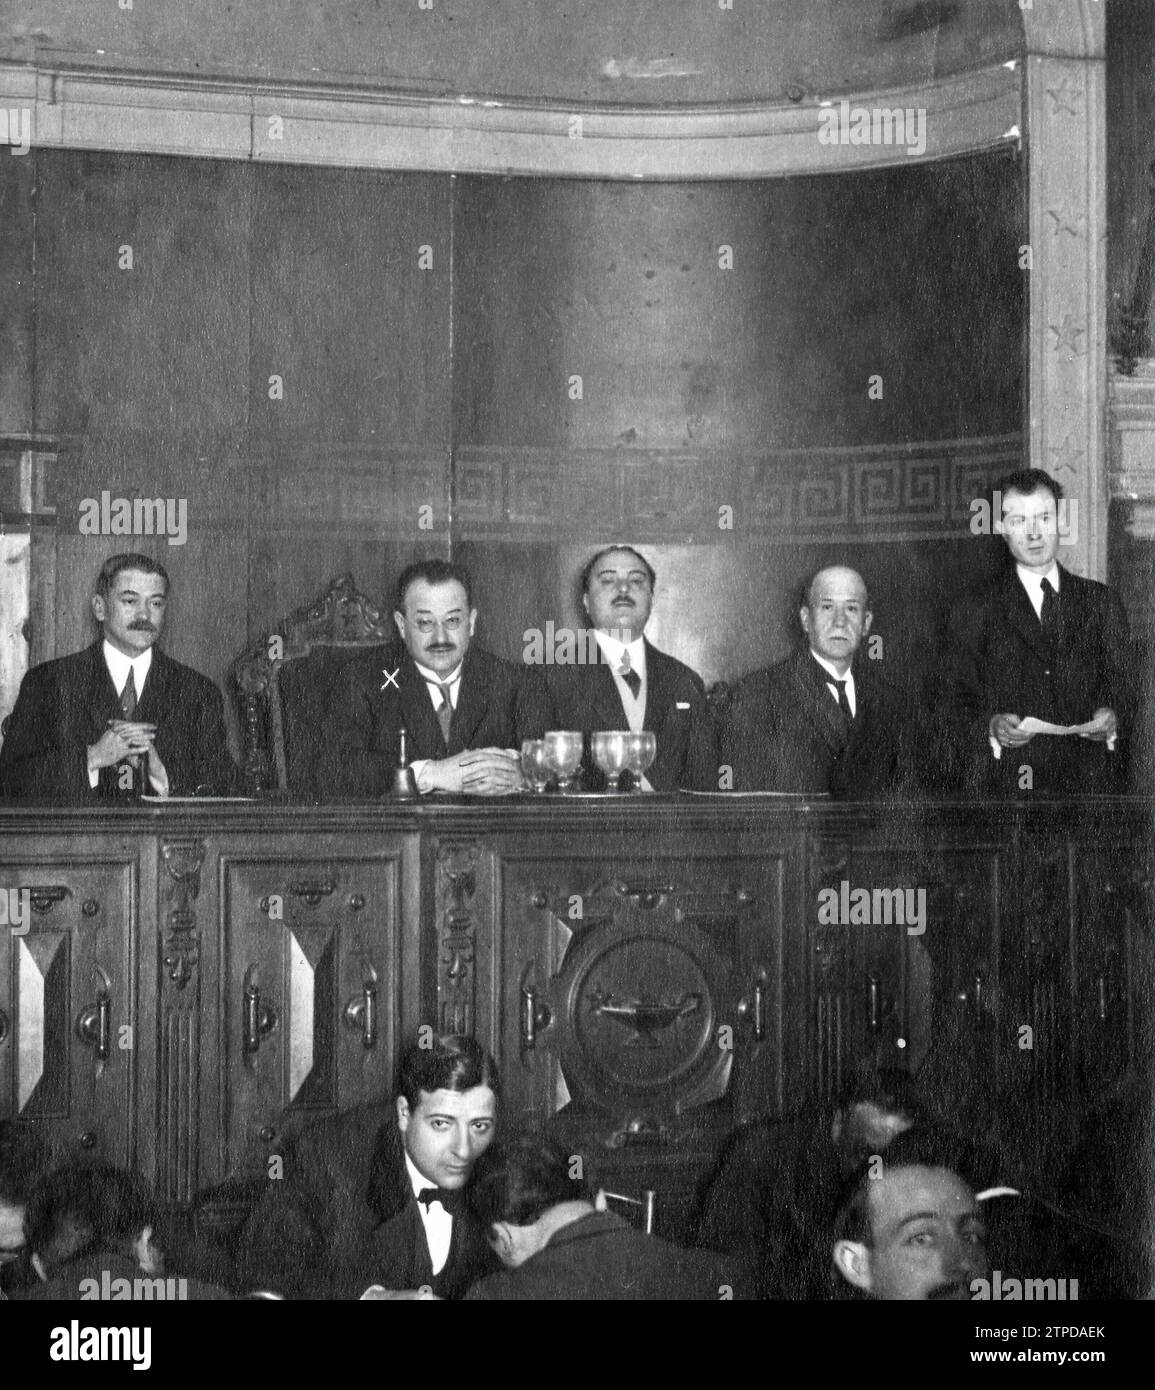 01/25/1919. In the Madrid athenaeum. Inaugural session of the third national congress of Civil health, Verified Yesterday, under the presidency of the mayor of Madrid, Mr. Garrido Juaristi (X). Credit: Album / Archivo ABC / José Zegri Stock Photo